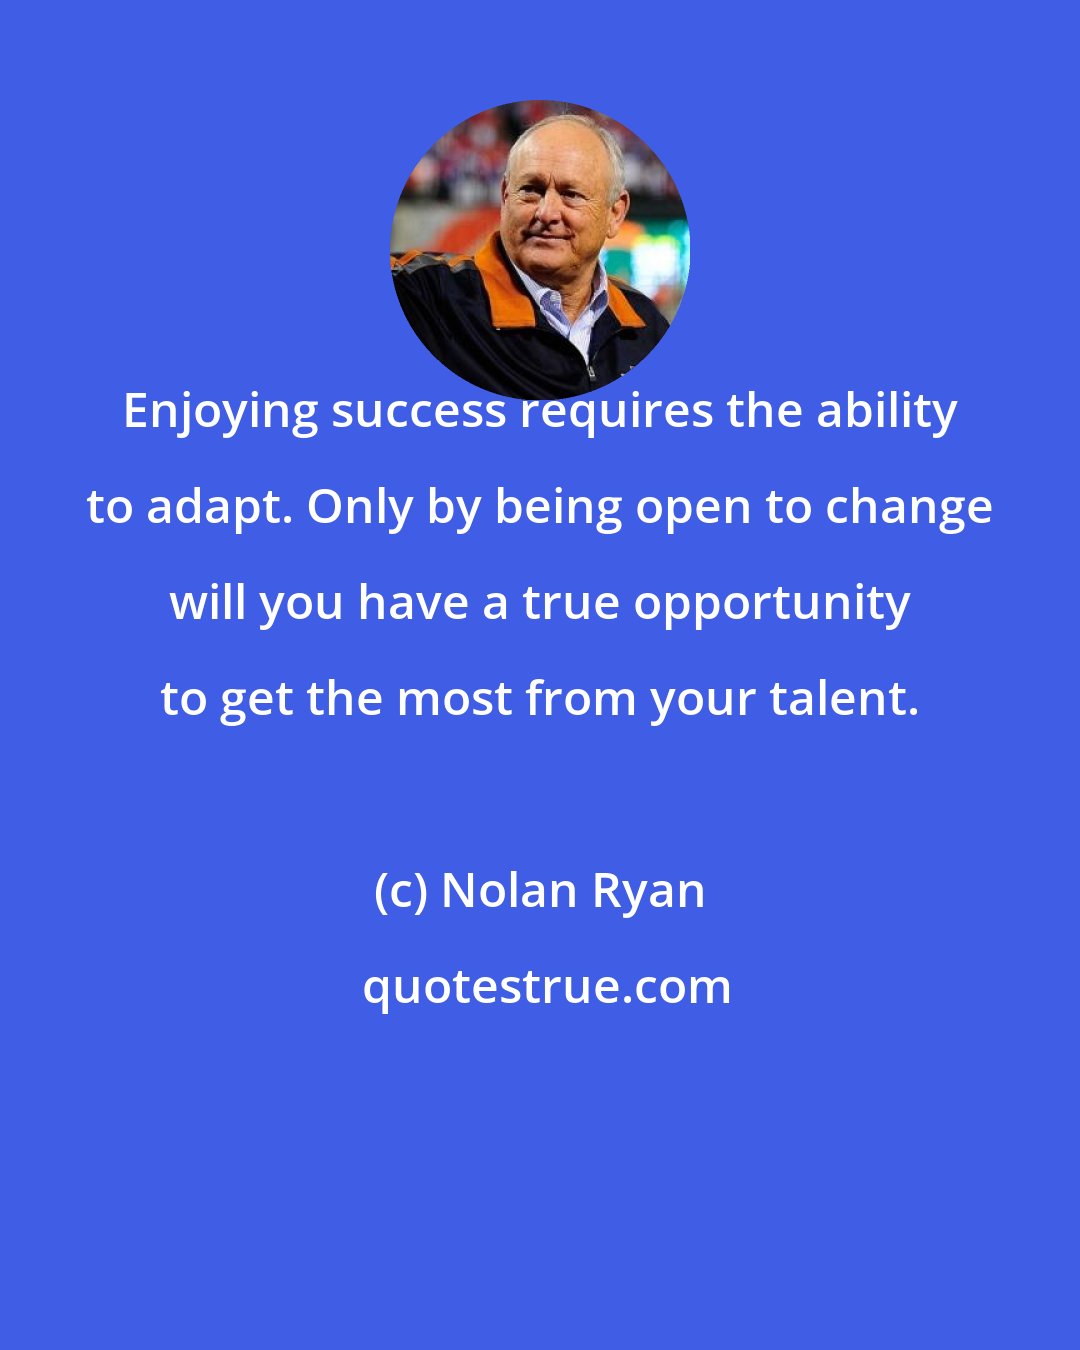 Nolan Ryan: Enjoying success requires the ability to adapt. Only by being open to change will you have a true opportunity to get the most from your talent.